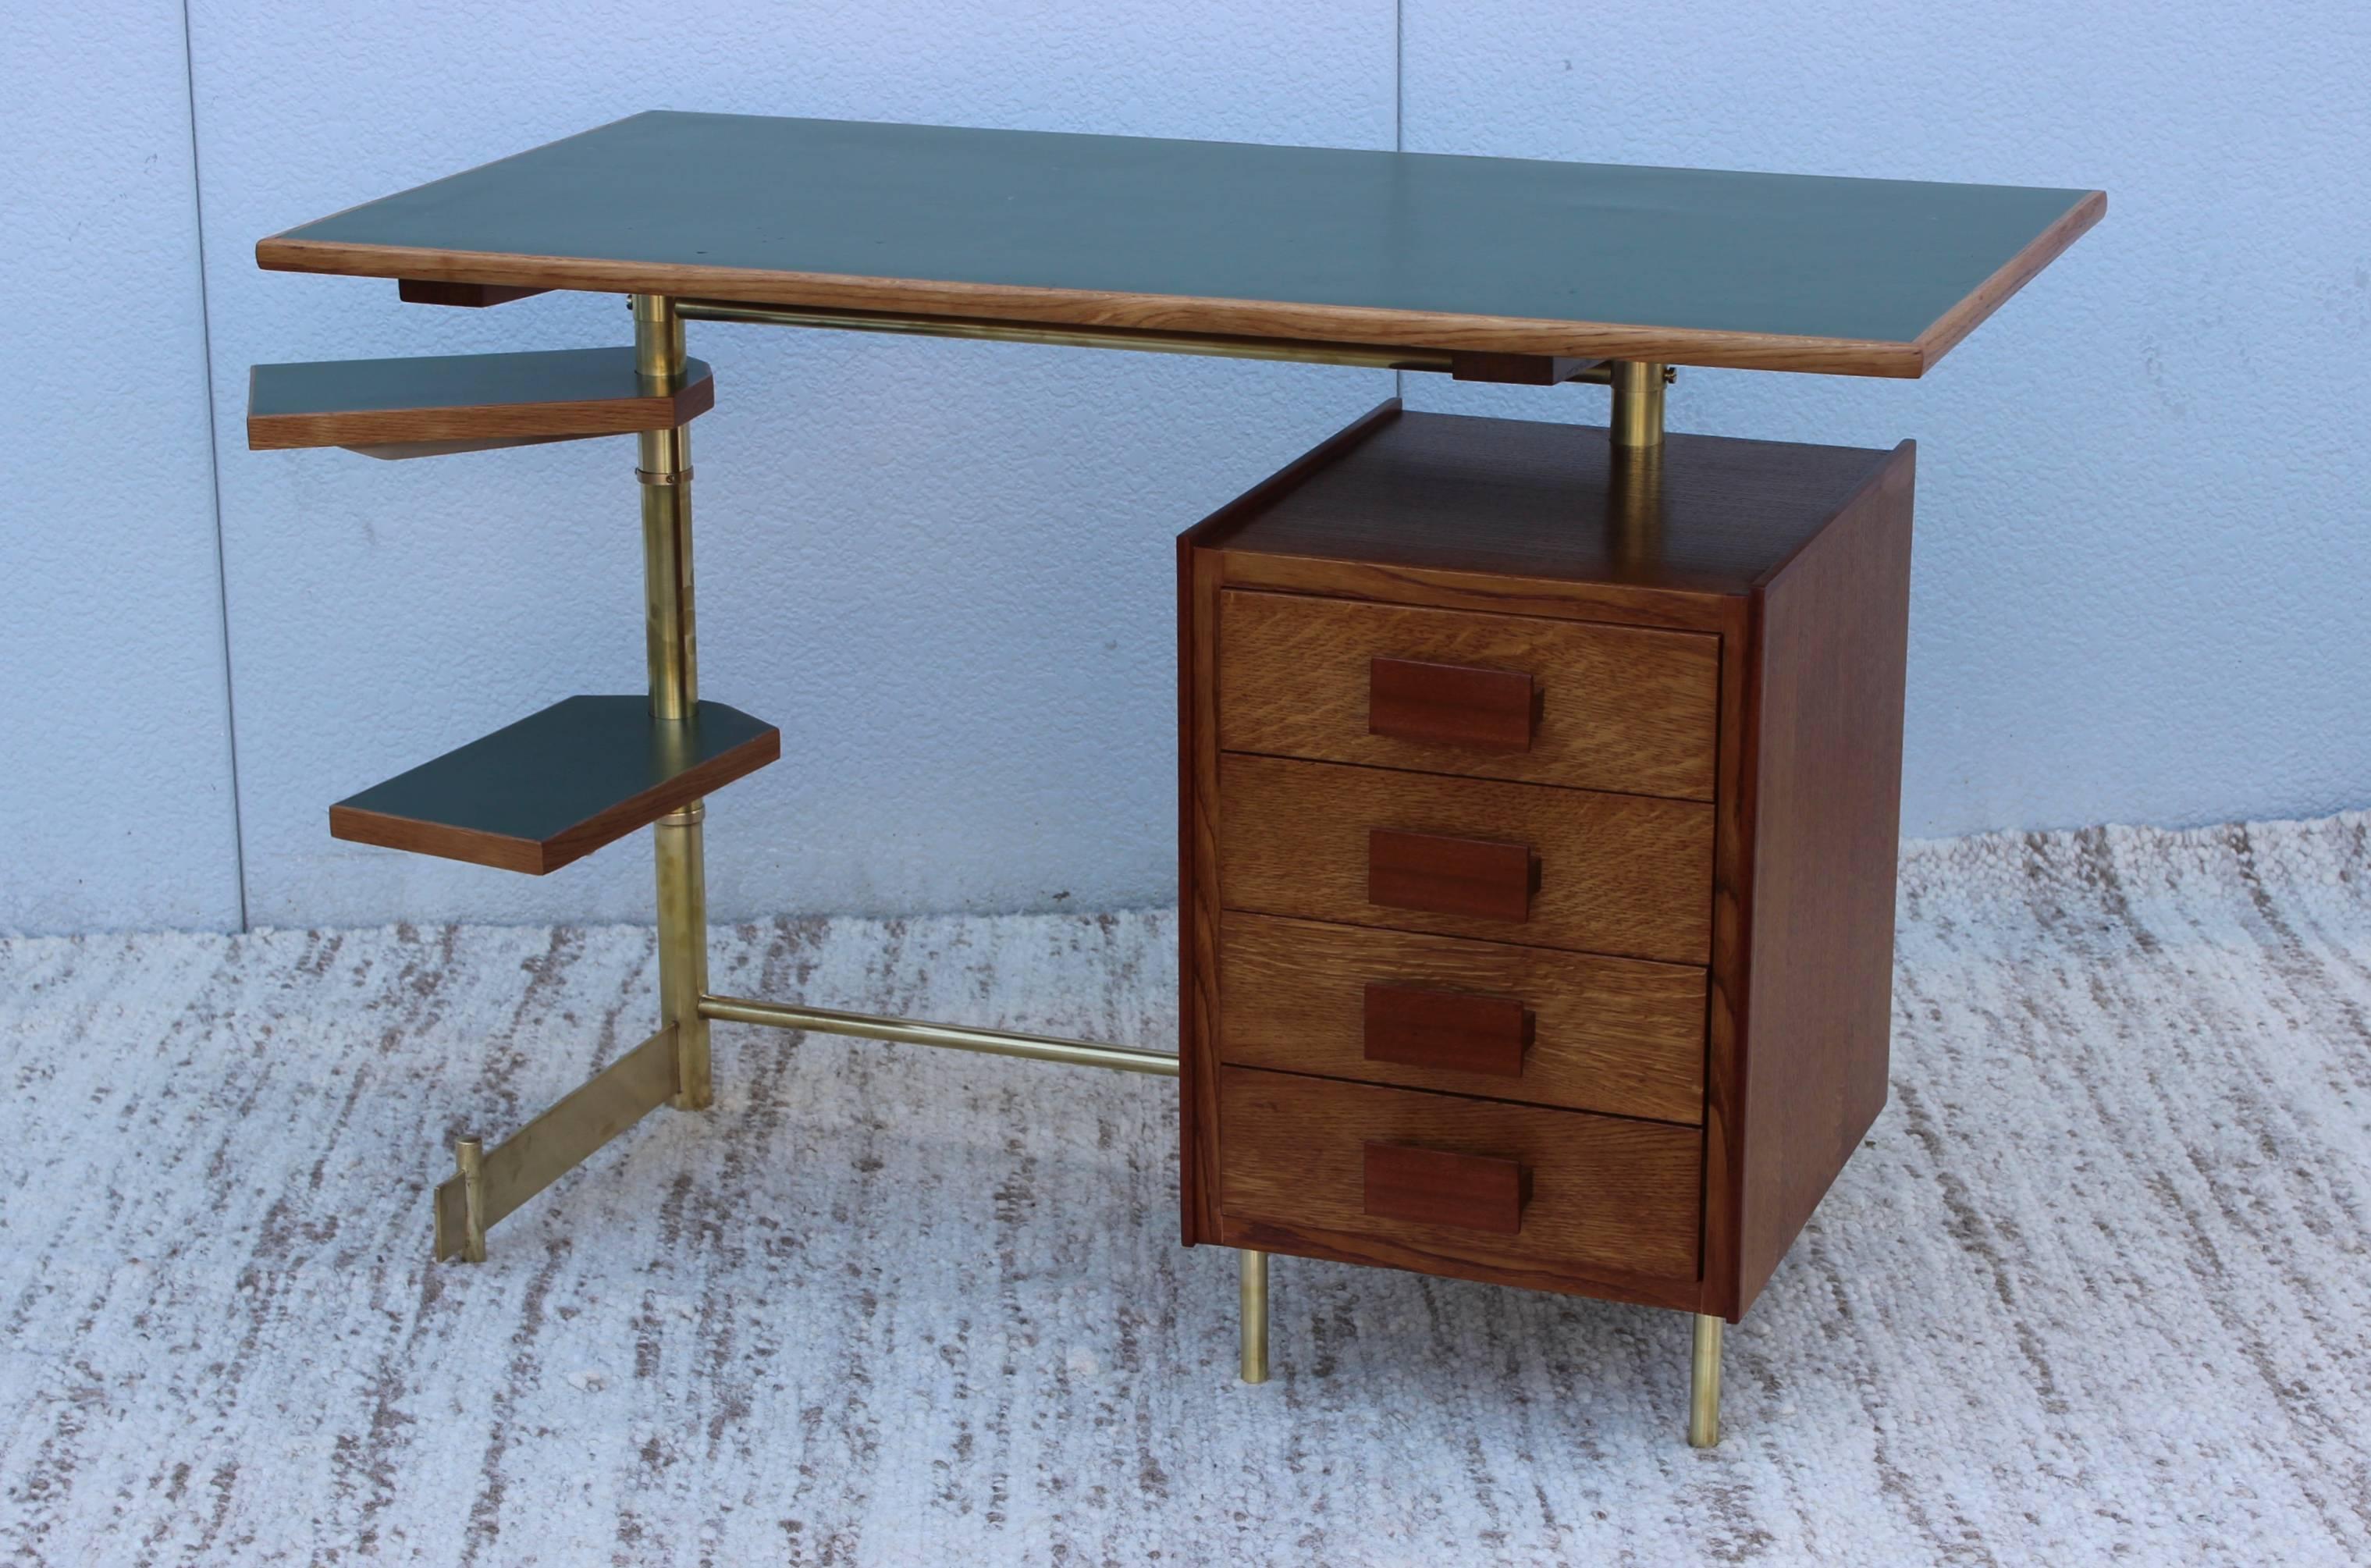 Stunning 1950s modern Italian desk made of oak and teak with brass frame. Four drawers with teak handles and linoleum top, the two trays which swivel 360 degrees.